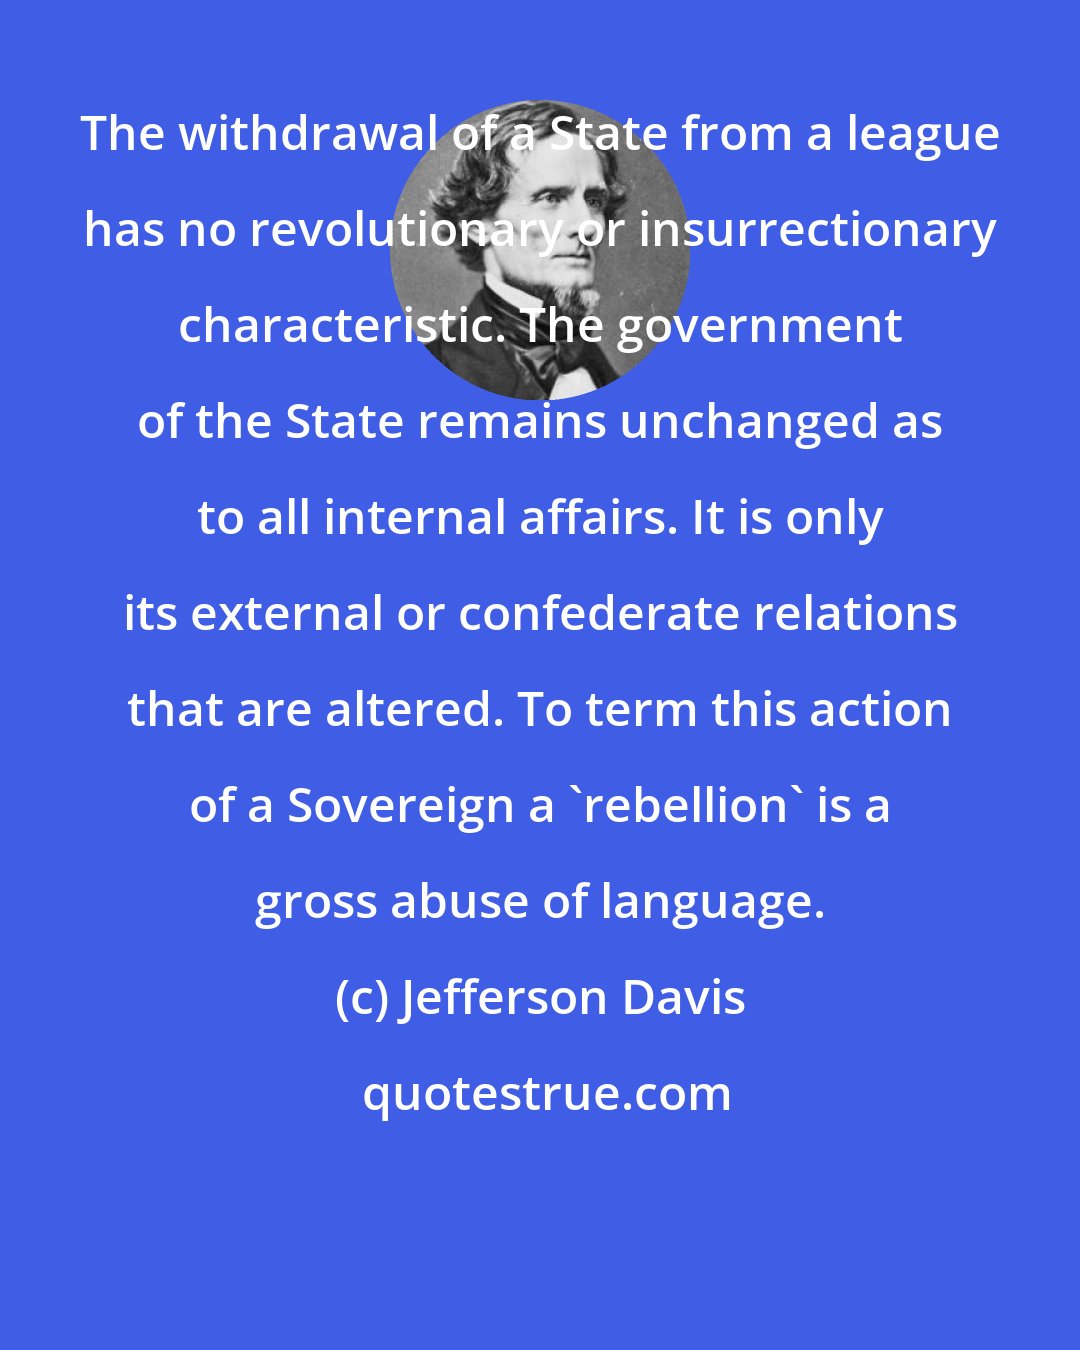 Jefferson Davis: The withdrawal of a State from a league has no revolutionary or insurrectionary characteristic. The government of the State remains unchanged as to all internal affairs. It is only its external or confederate relations that are altered. To term this action of a Sovereign a 'rebellion' is a gross abuse of language.